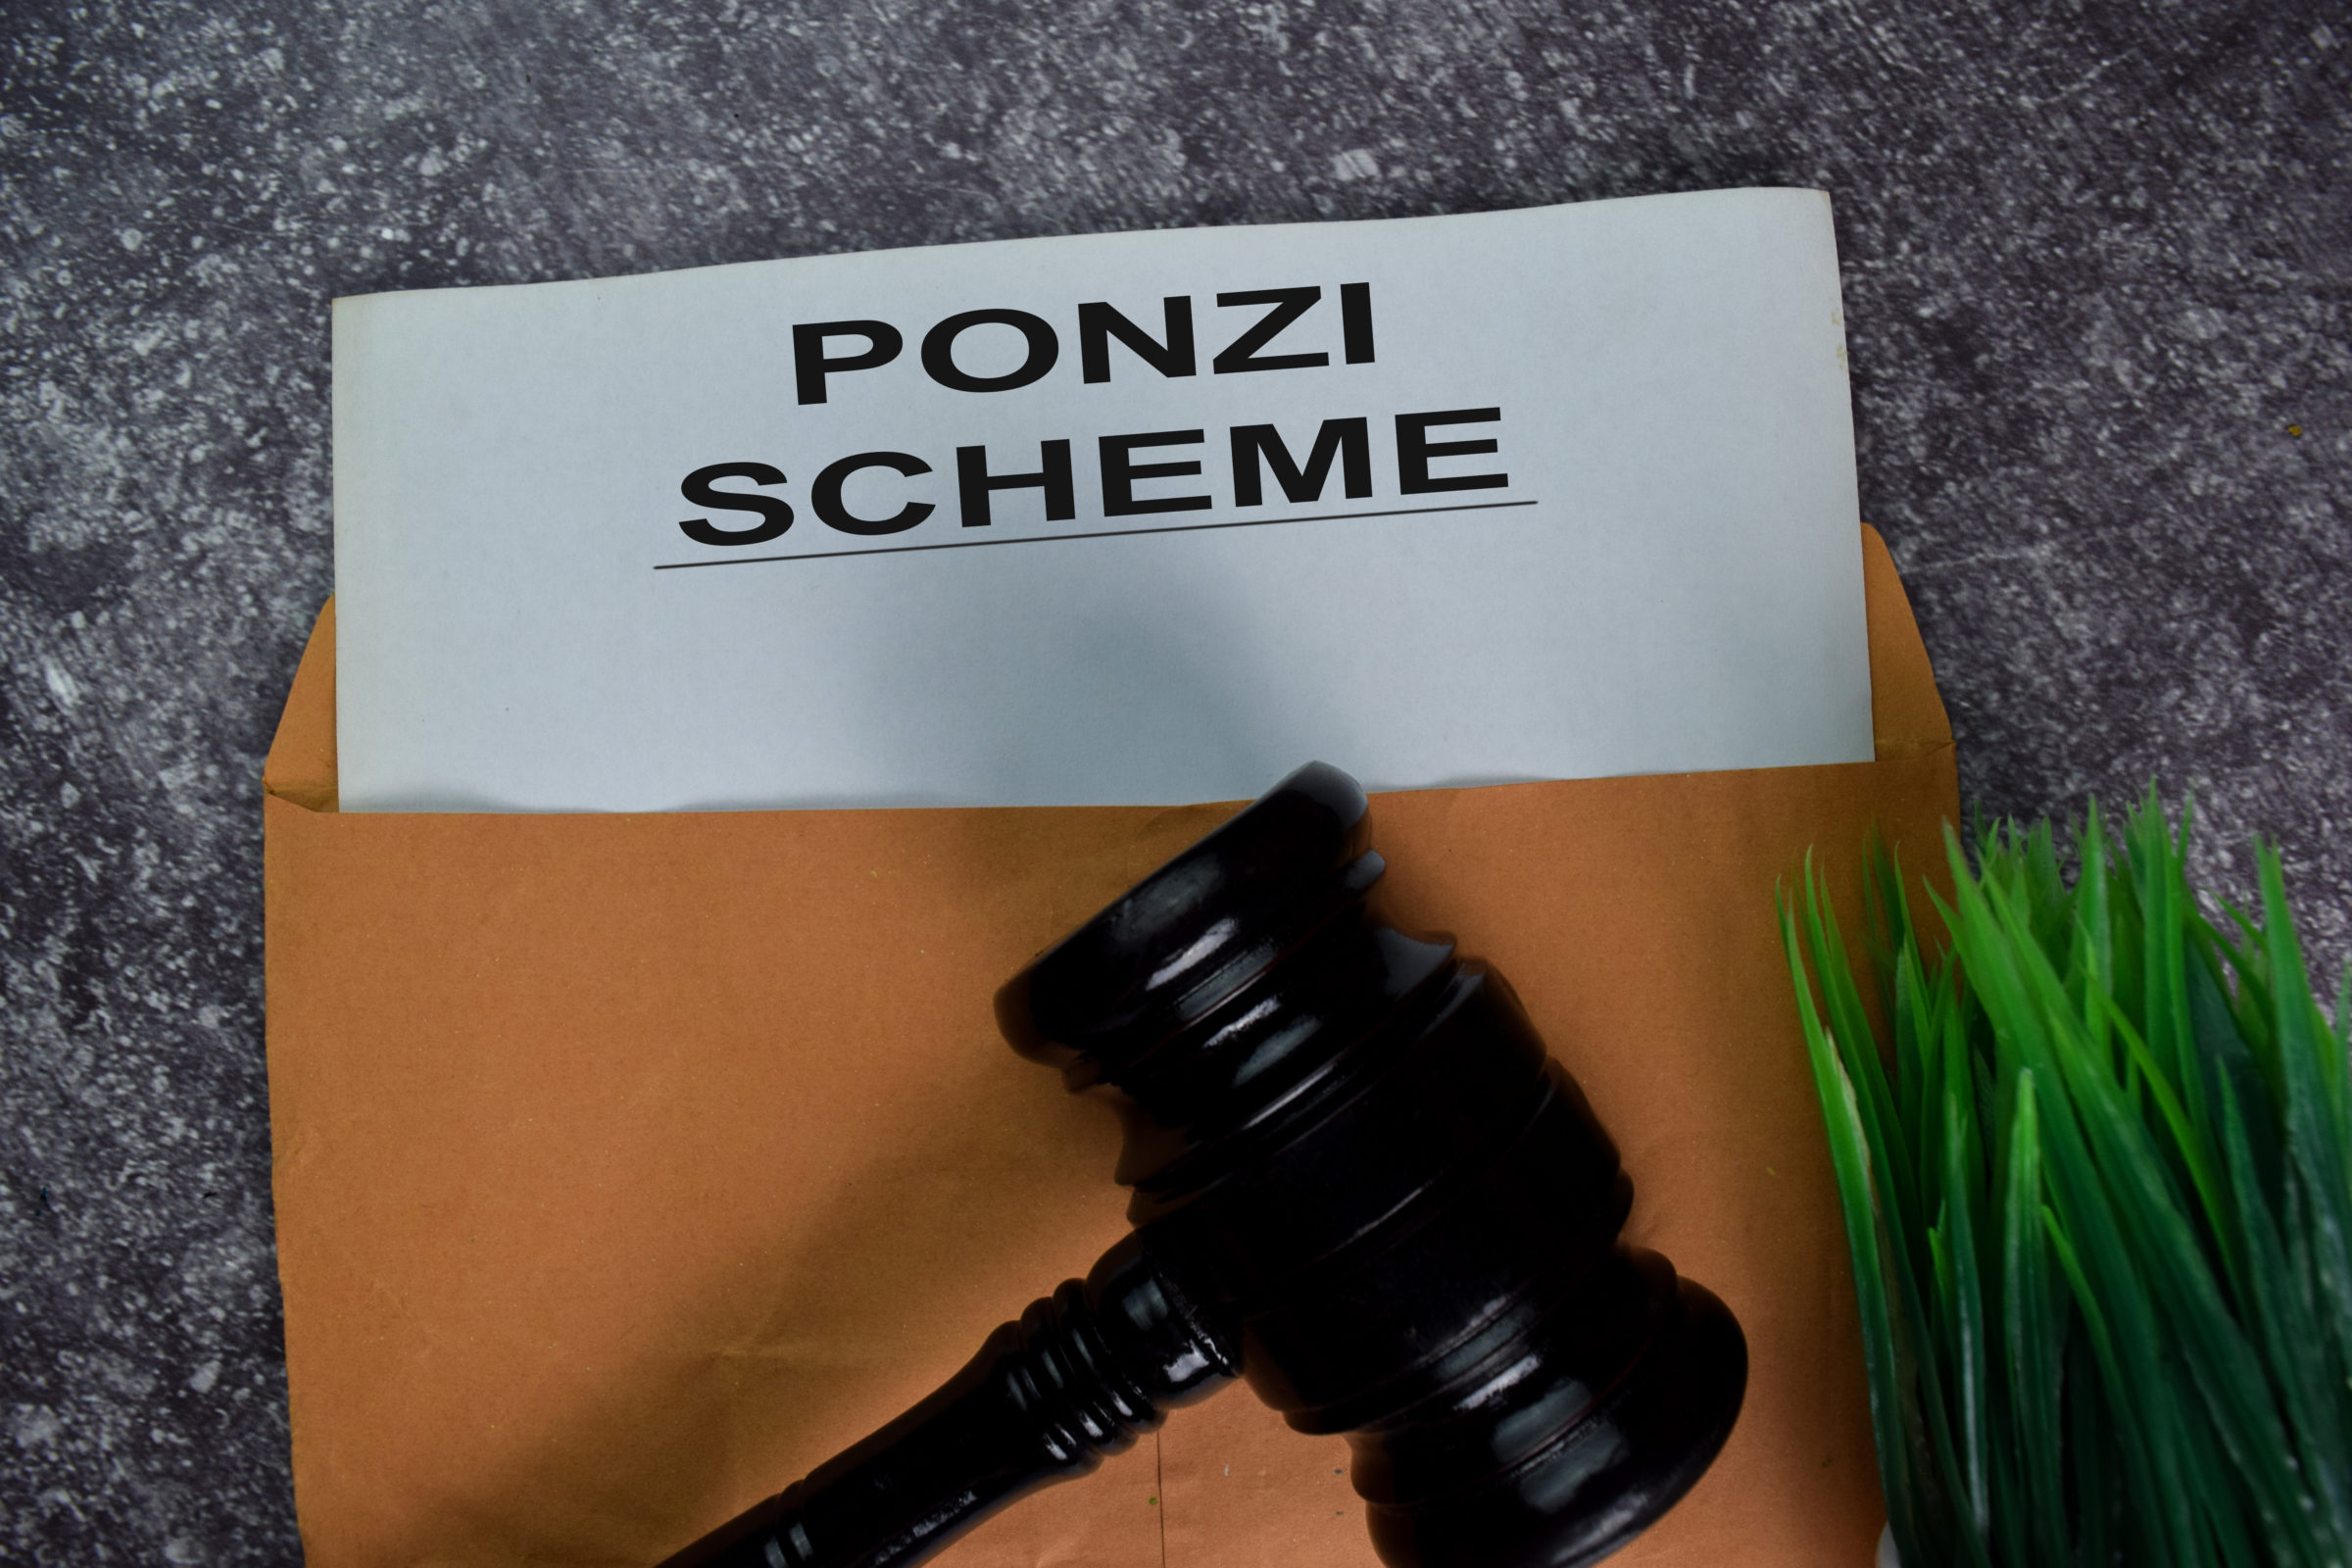 Ponzi Scheme text with document brown envelope and gavel isolated on office desk.